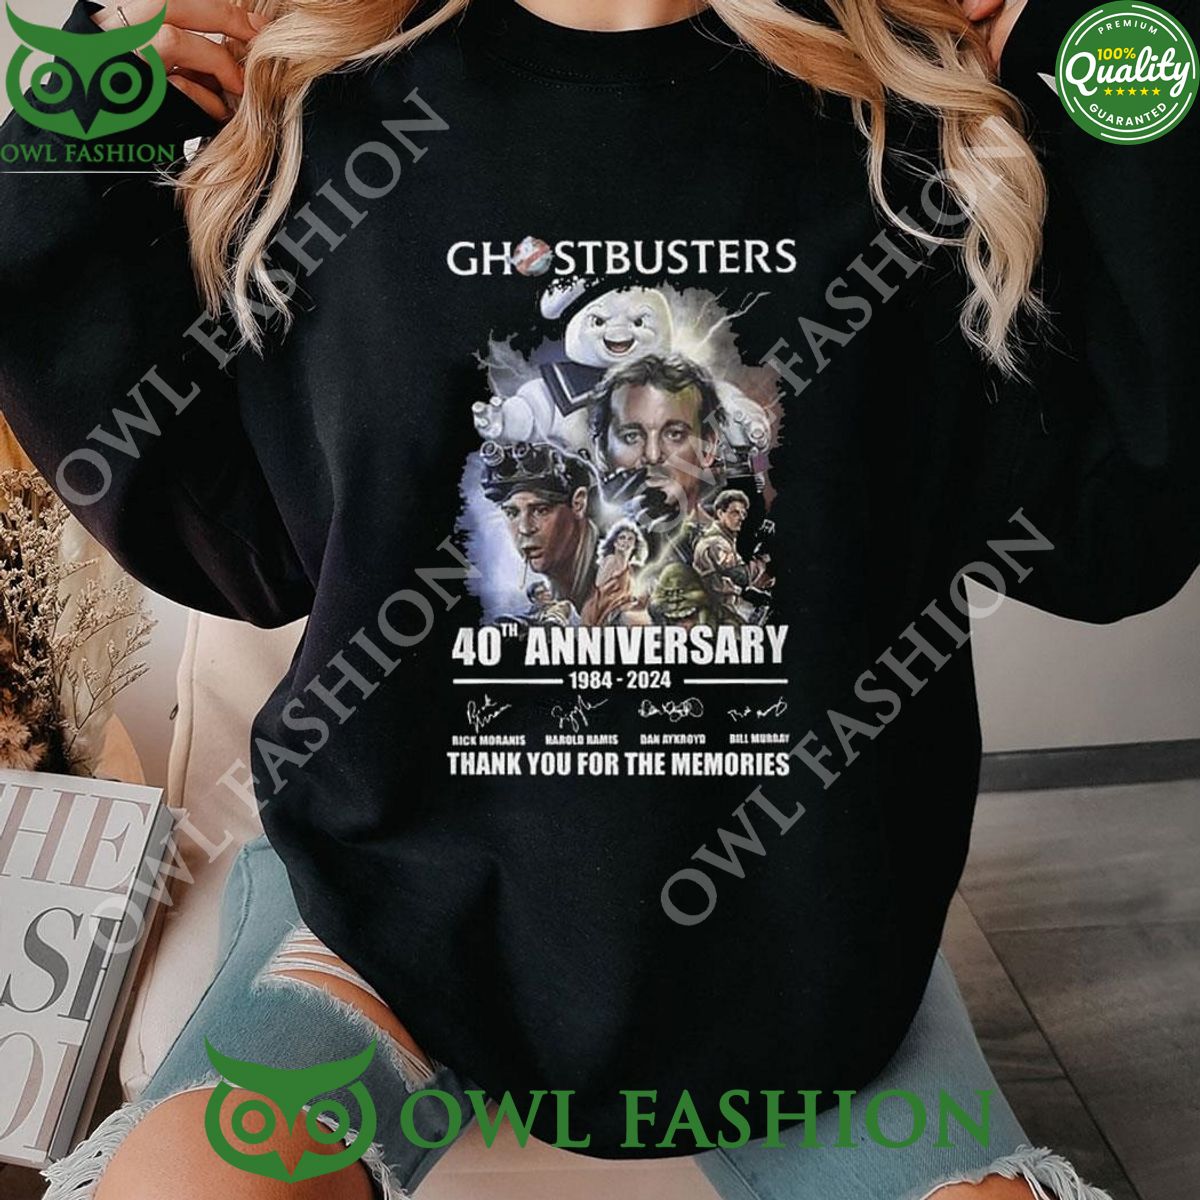 ghostbusters 40th anniversary 1984 2024 thank you for the memories shirt hoodie 1 YegNH.jpg